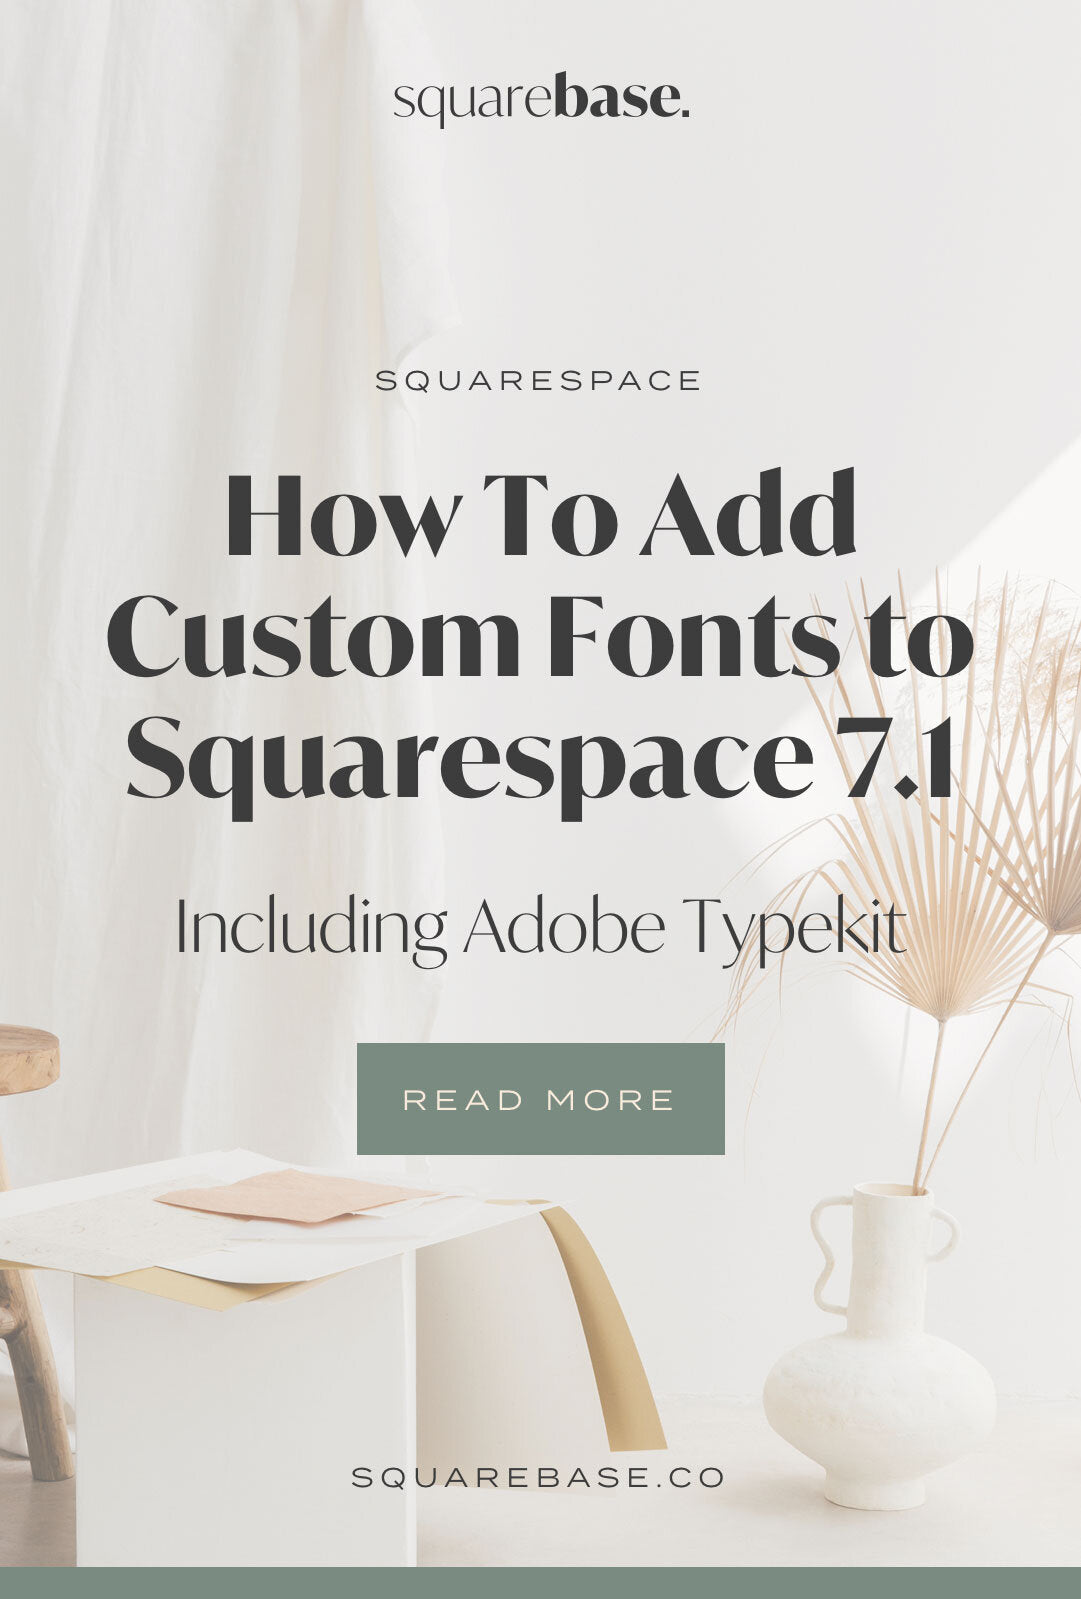 How To Add Custom Fonts to Squarespace 7.1 (including Adobe Typekit Fonts)